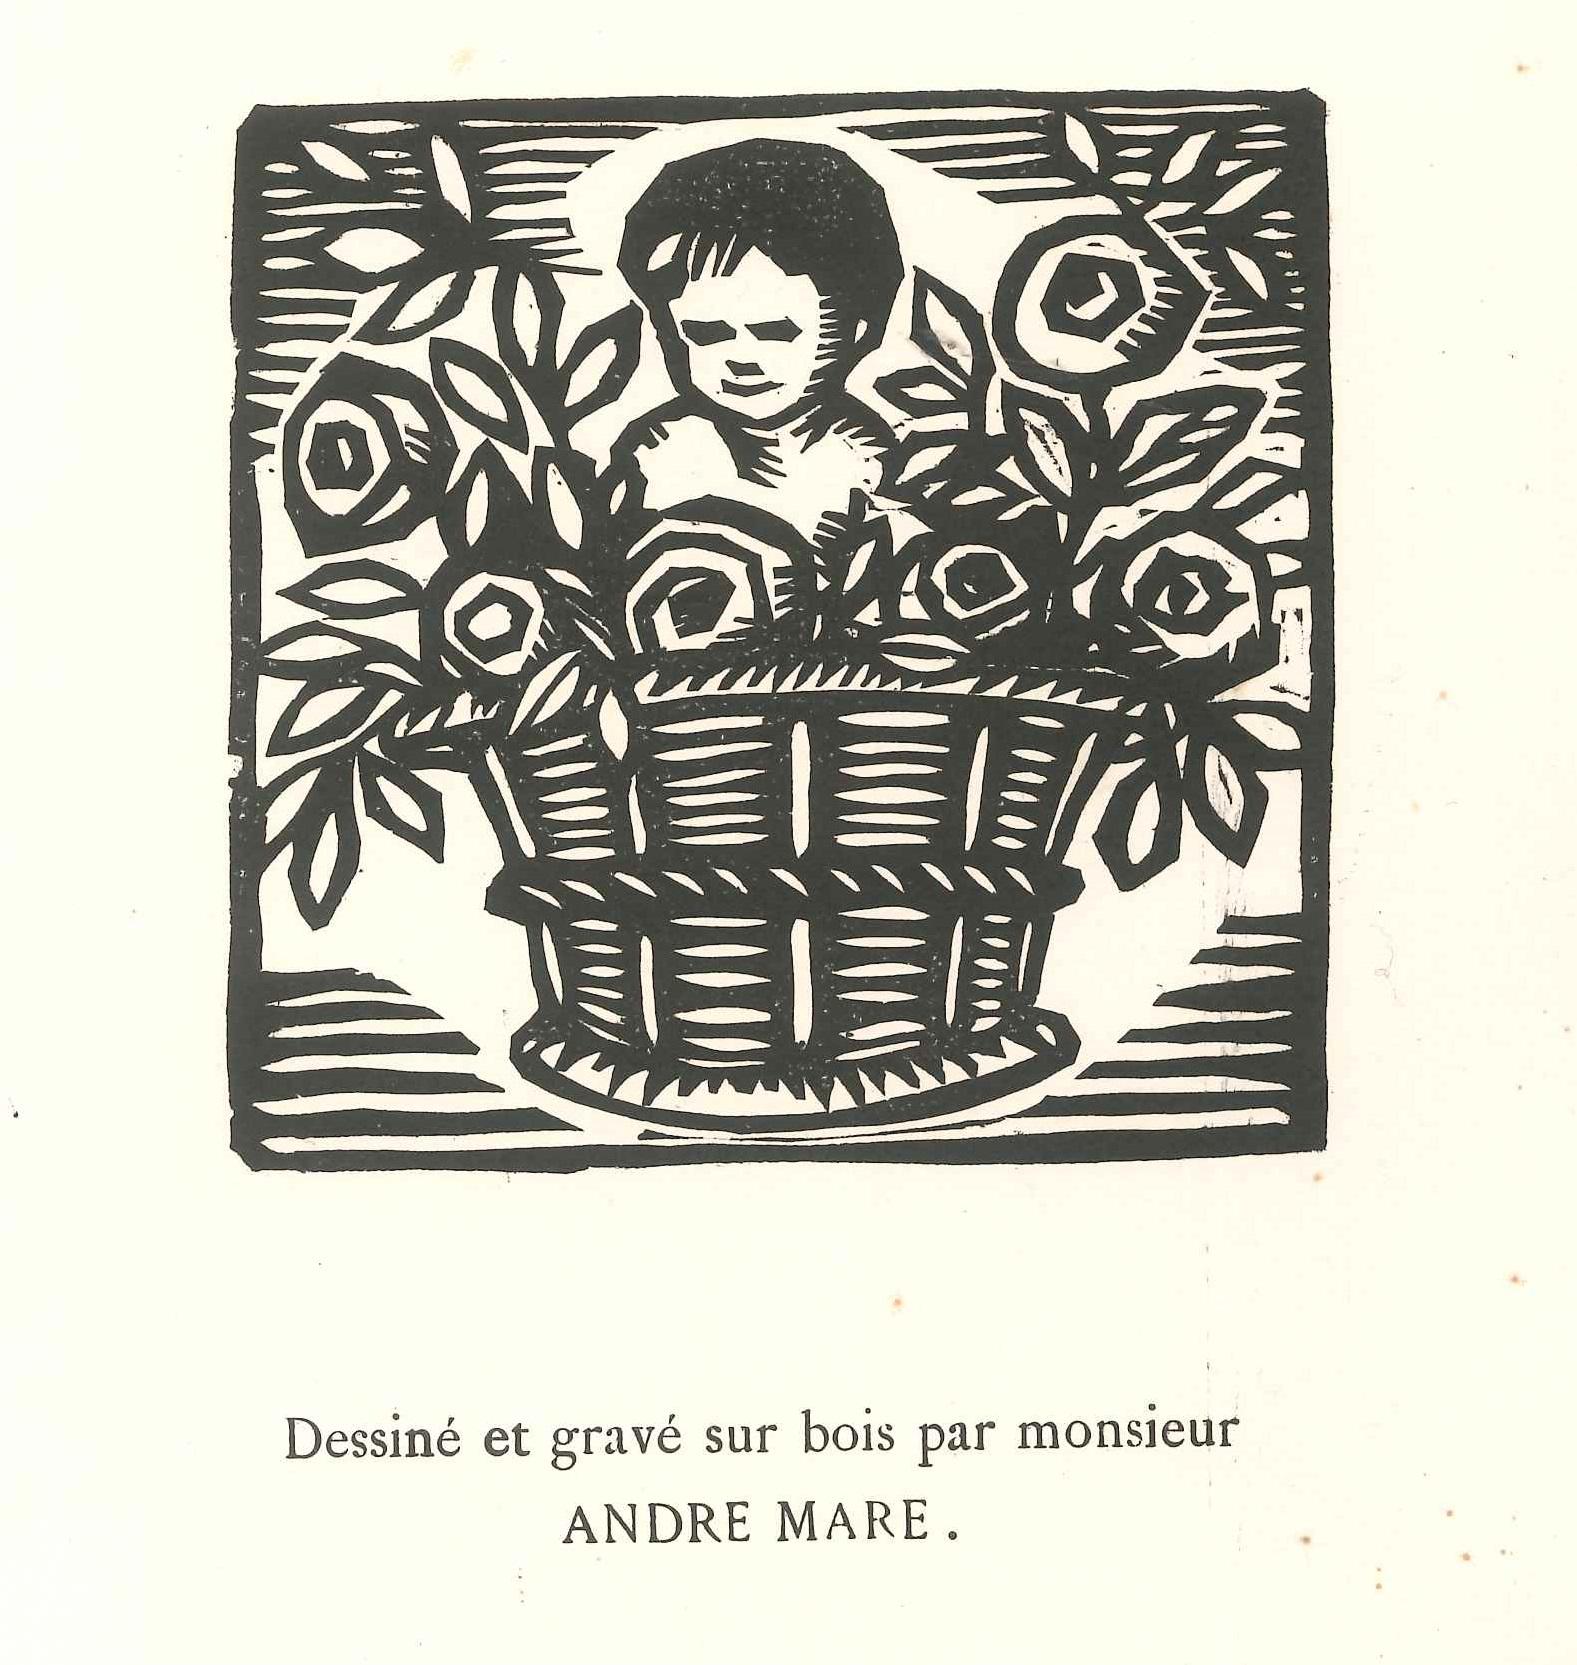 Child in the flower basket is a fine original print (engraved in the wood) by André Mare (Argentinian, 1885 - 1932), as the typewritten note reports below the image.

In excellent conditions, except for a normal yellowing on the margins and a light